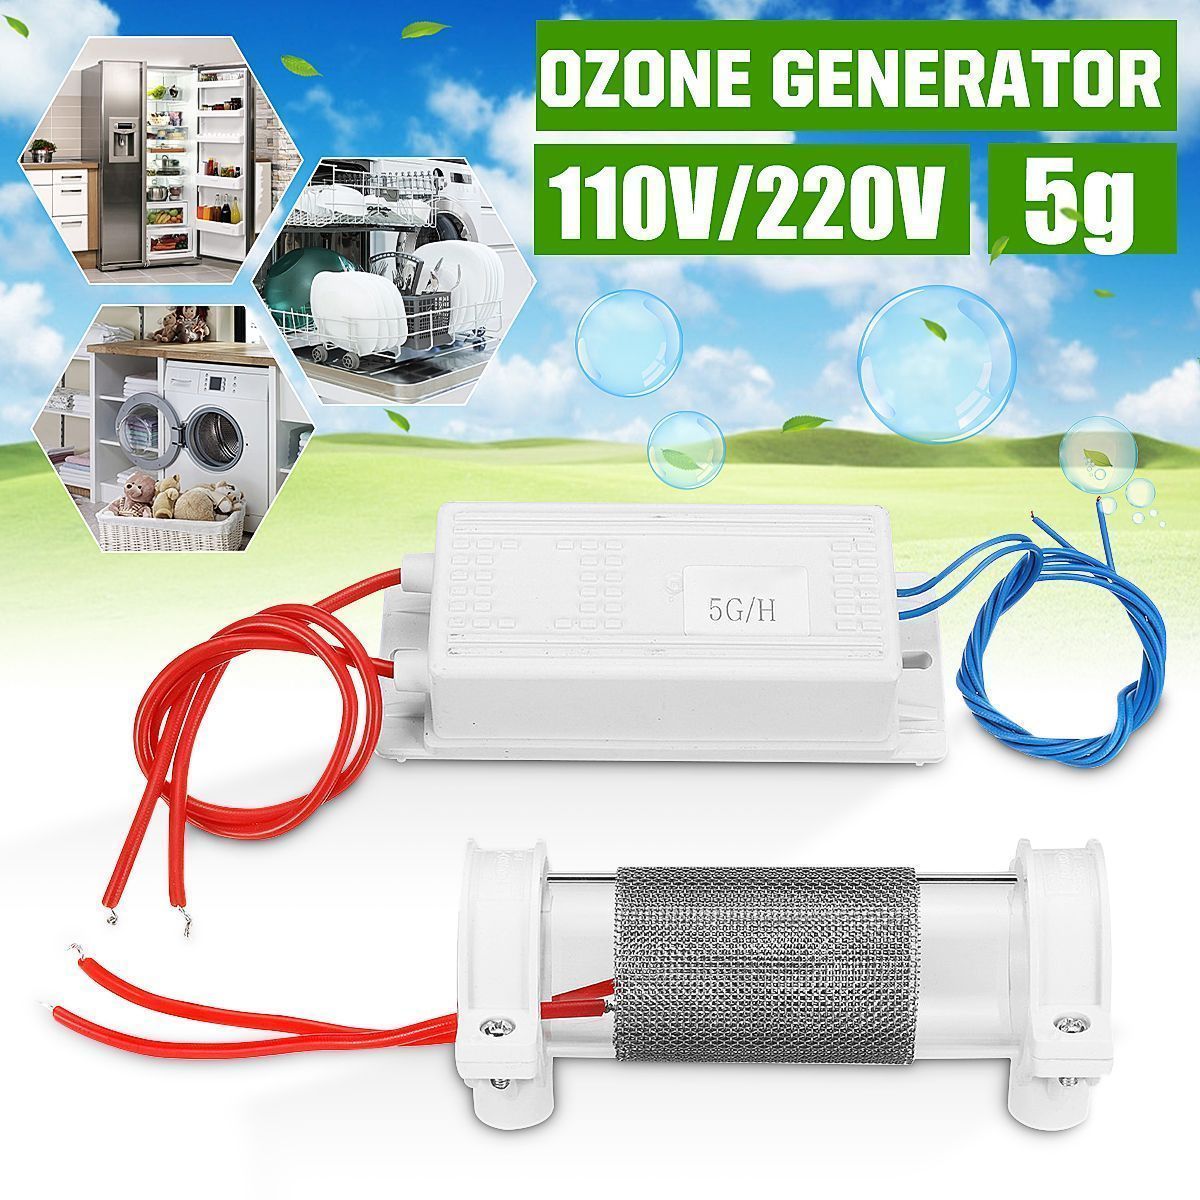 5gh-Ozone-Generator-Air-Water-Air-Purifier-For-Dishwasher-Refrigerator-Cabinet-1628324